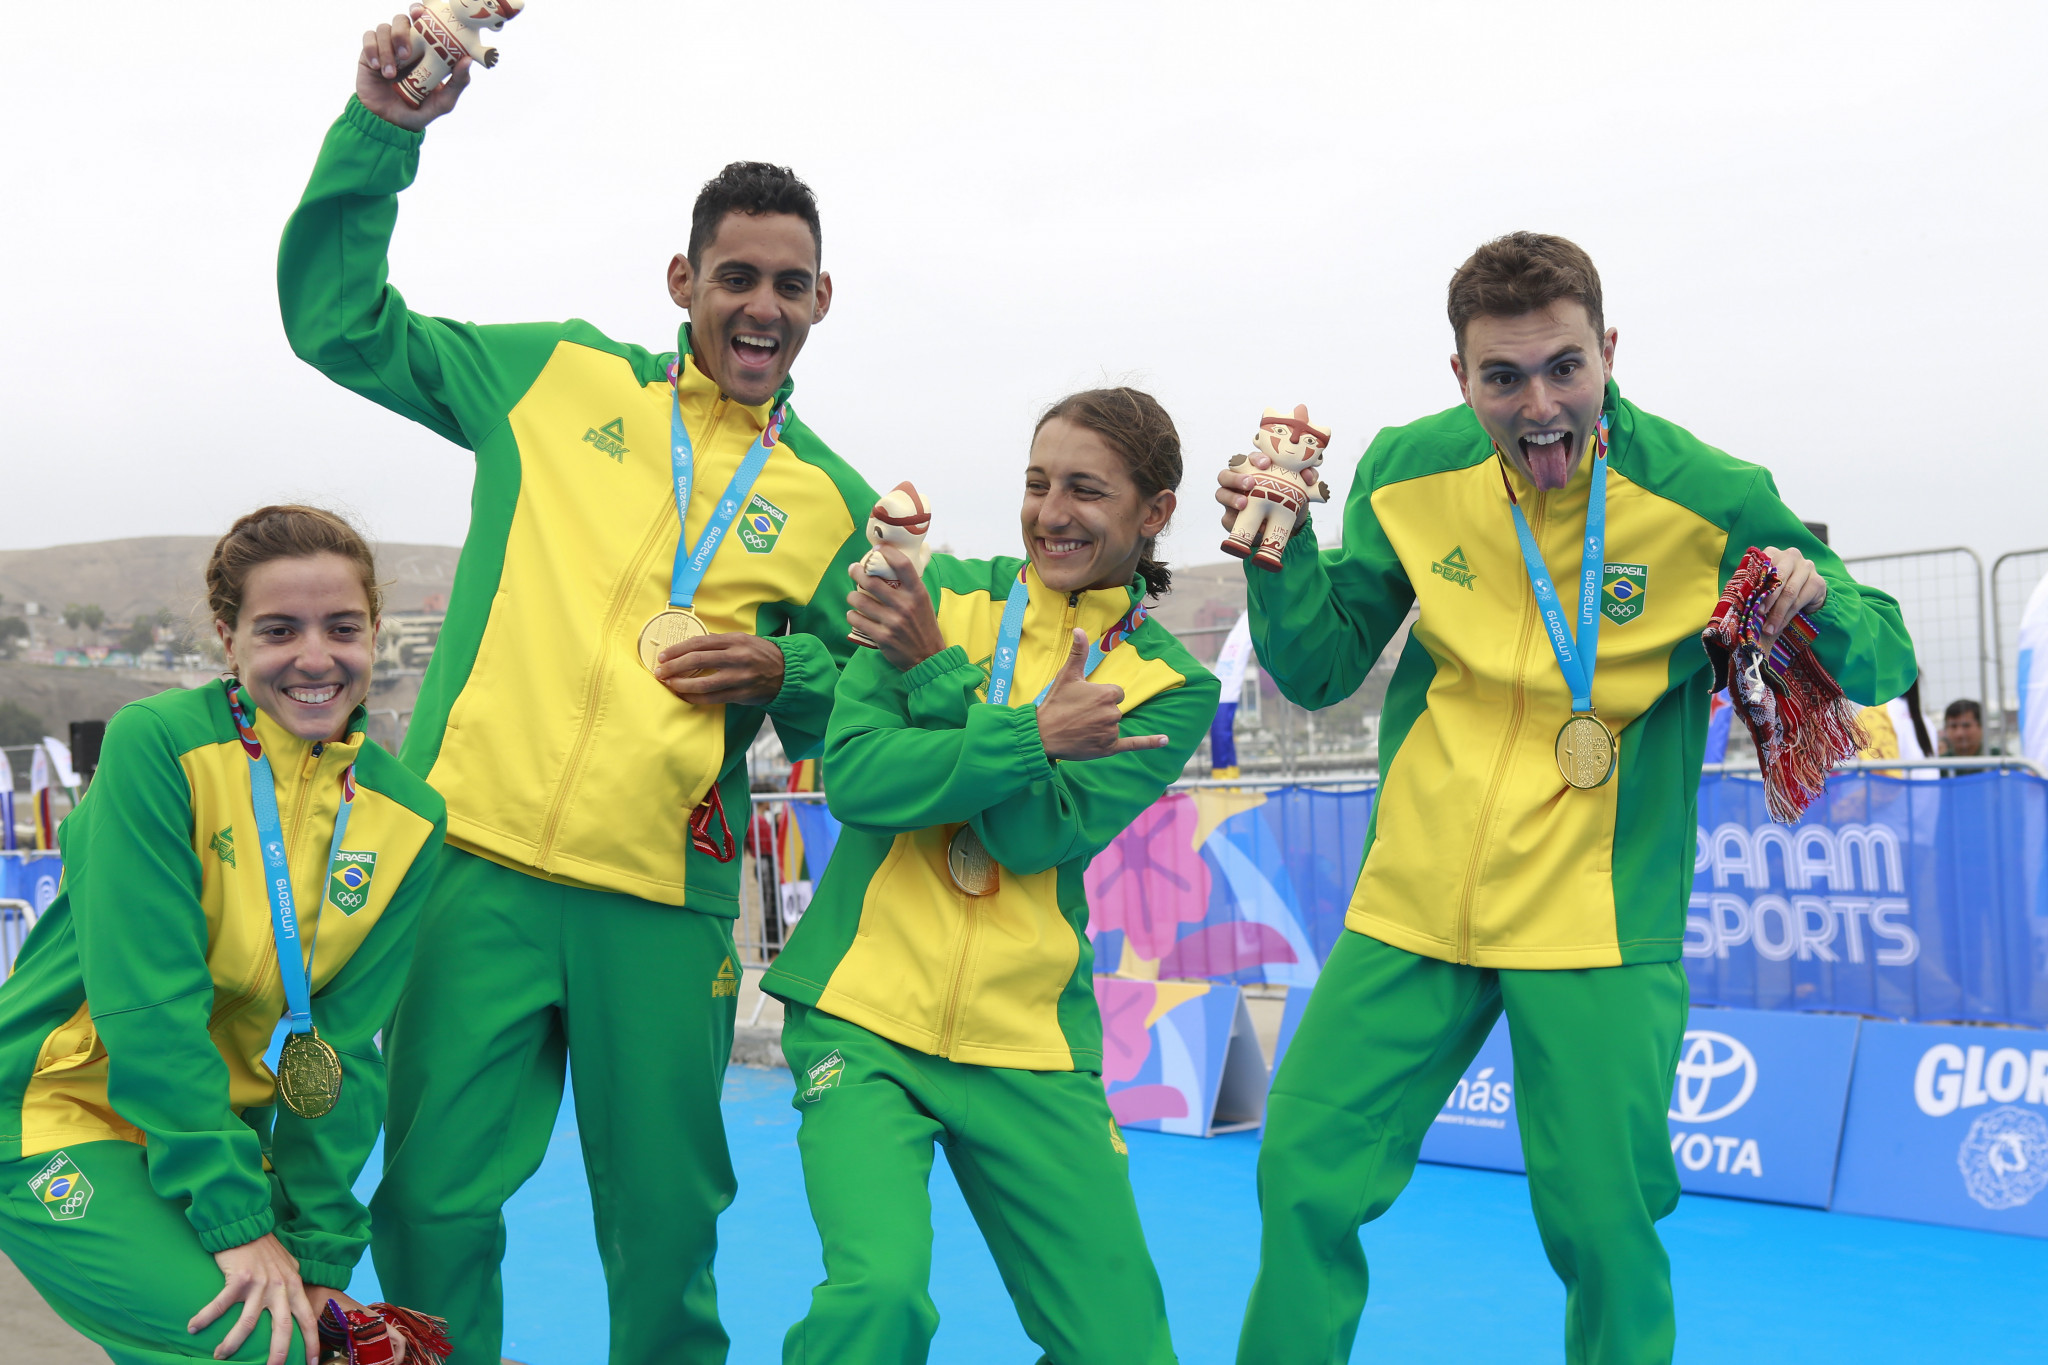 Brazil won gold in the men's event, with the women securing bronze ©Lima 2019